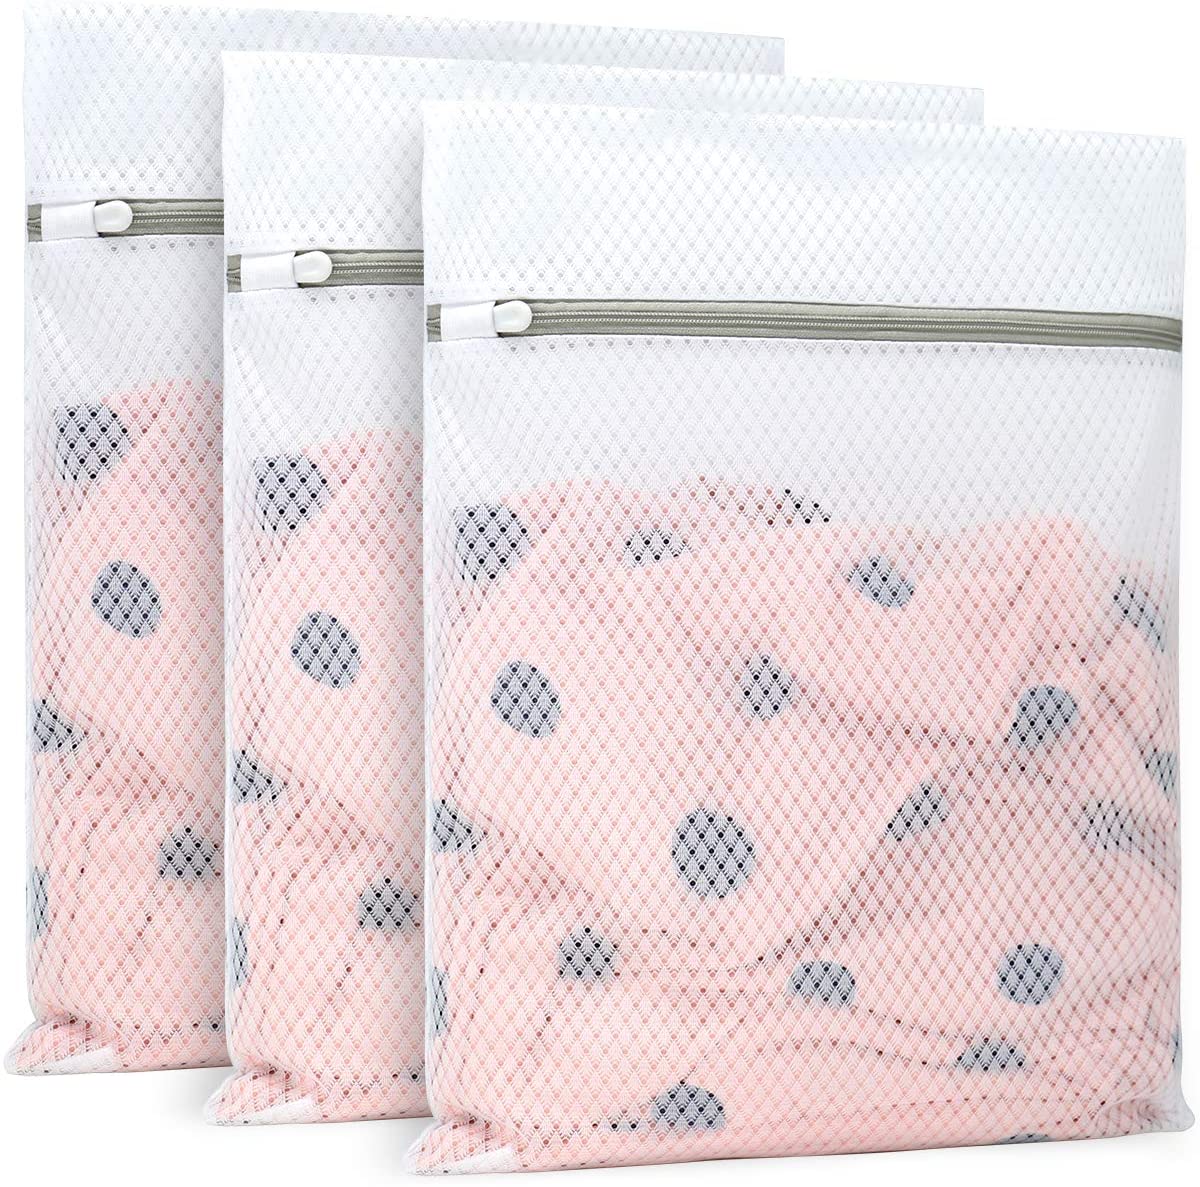 Durable Diamond Mesh Laundry Bags for Delicates